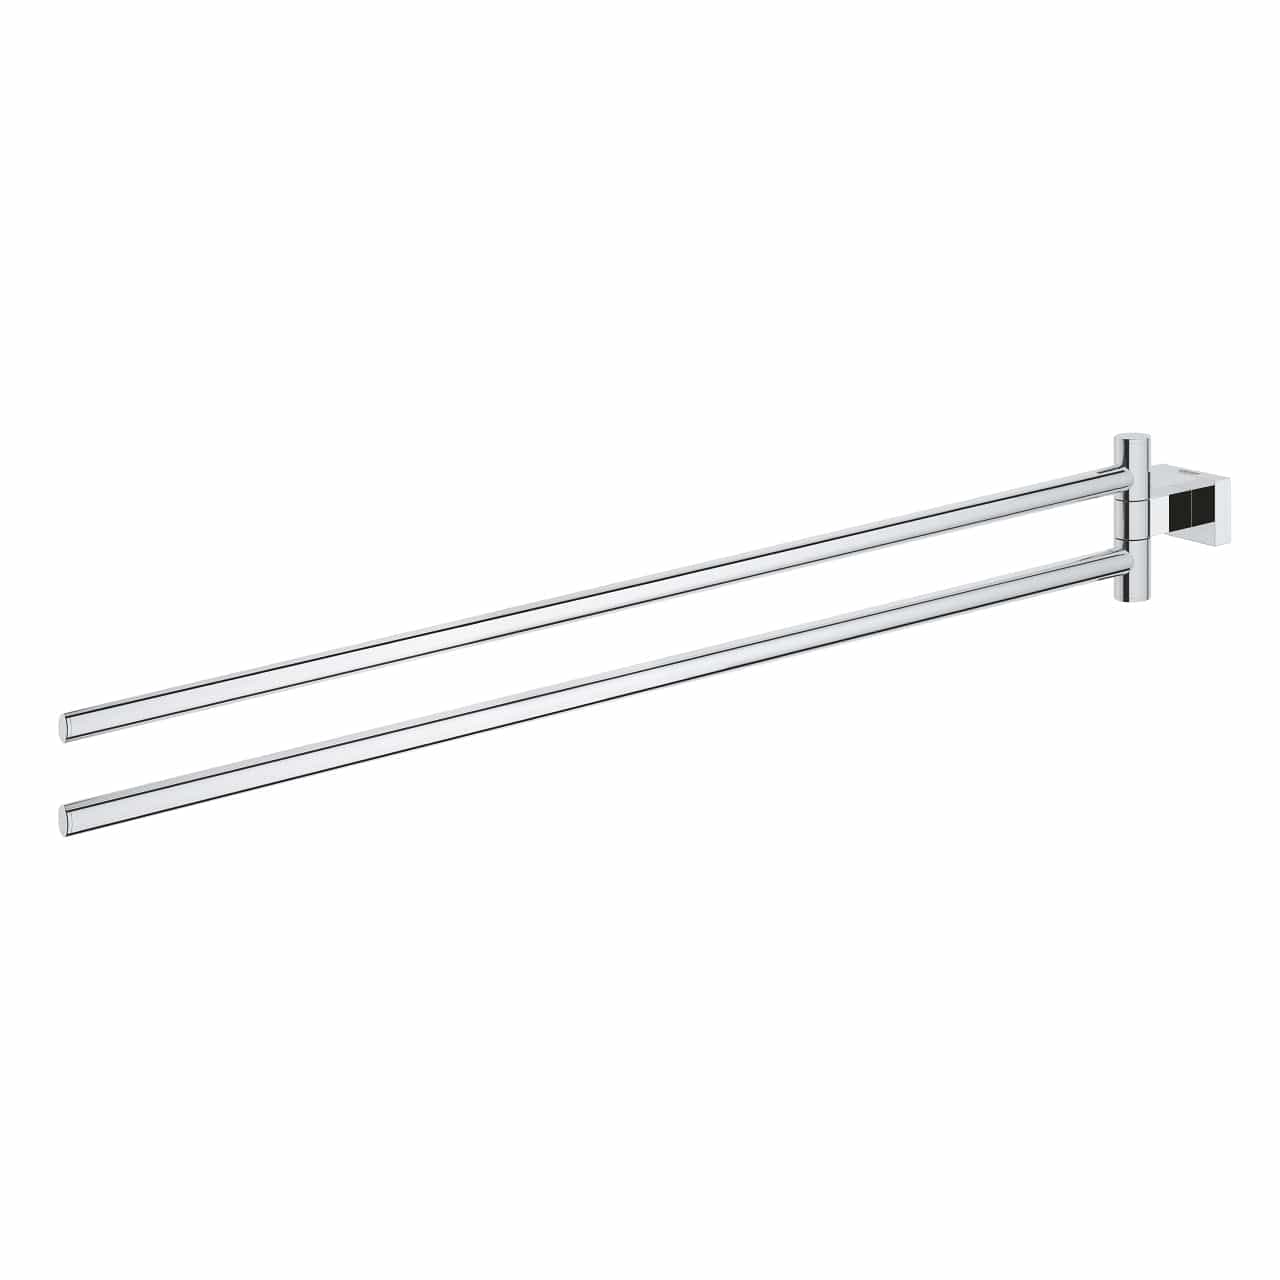 Grohe Essentials Cube Towel Bar | Supply Master | Accra, Ghana Bathroom Accessories Buy Tools hardware Building materials